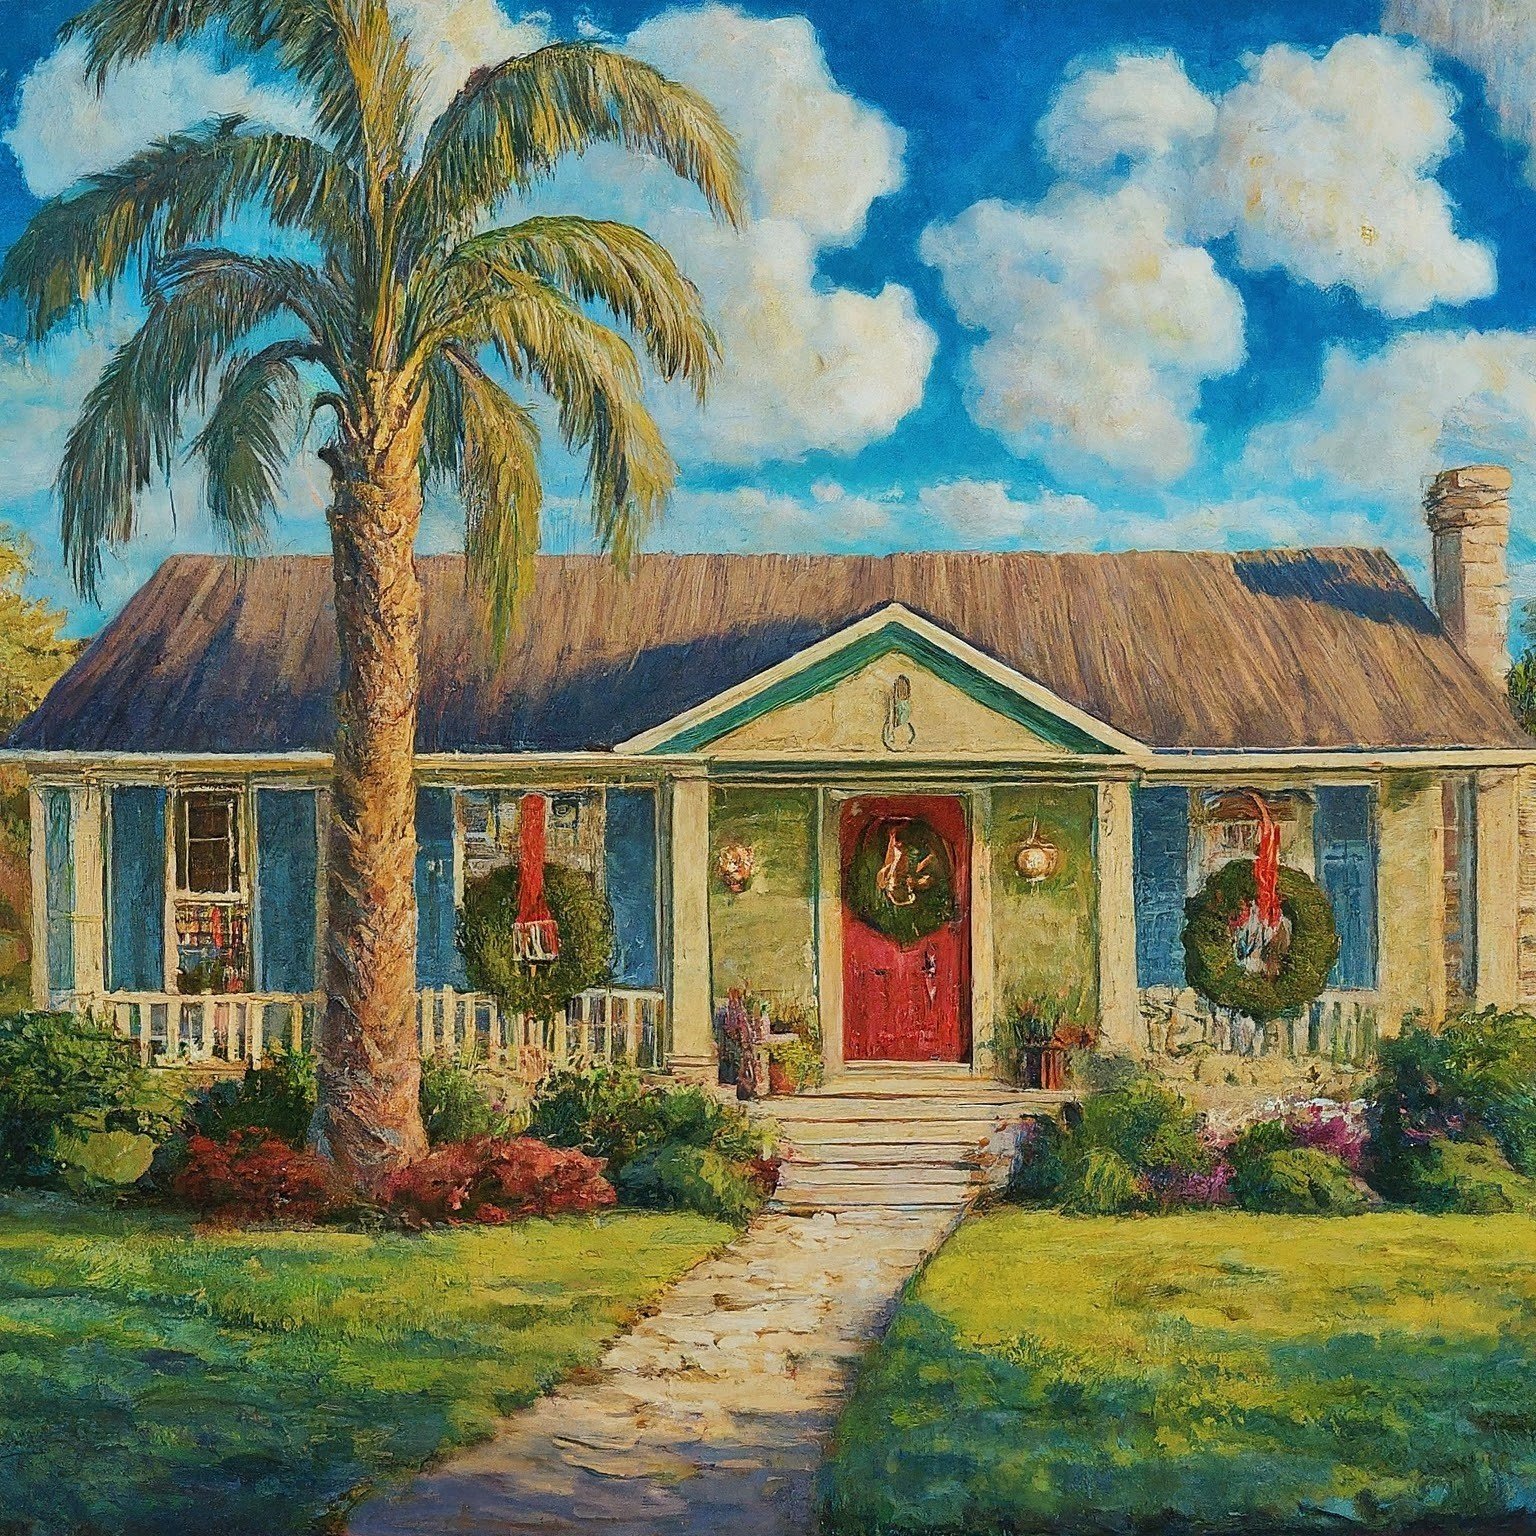 A Family’s Florida Homestead Saved, Just in Time for the Holidays